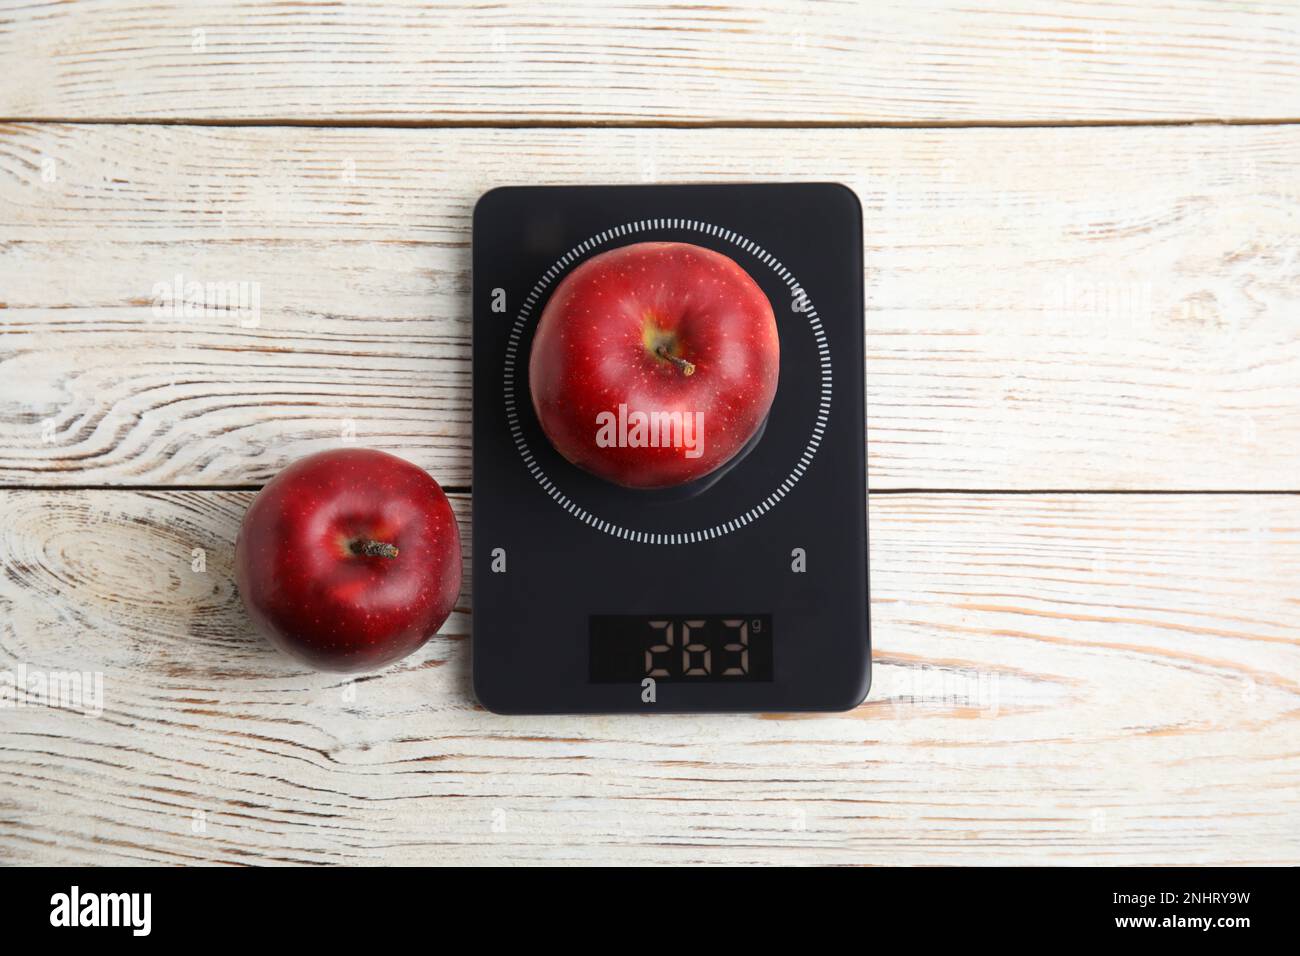 https://c8.alamy.com/comp/2NHRY9W/ripe-red-apples-and-electronic-scales-on-white-wooden-table-flat-lay-2NHRY9W.jpg